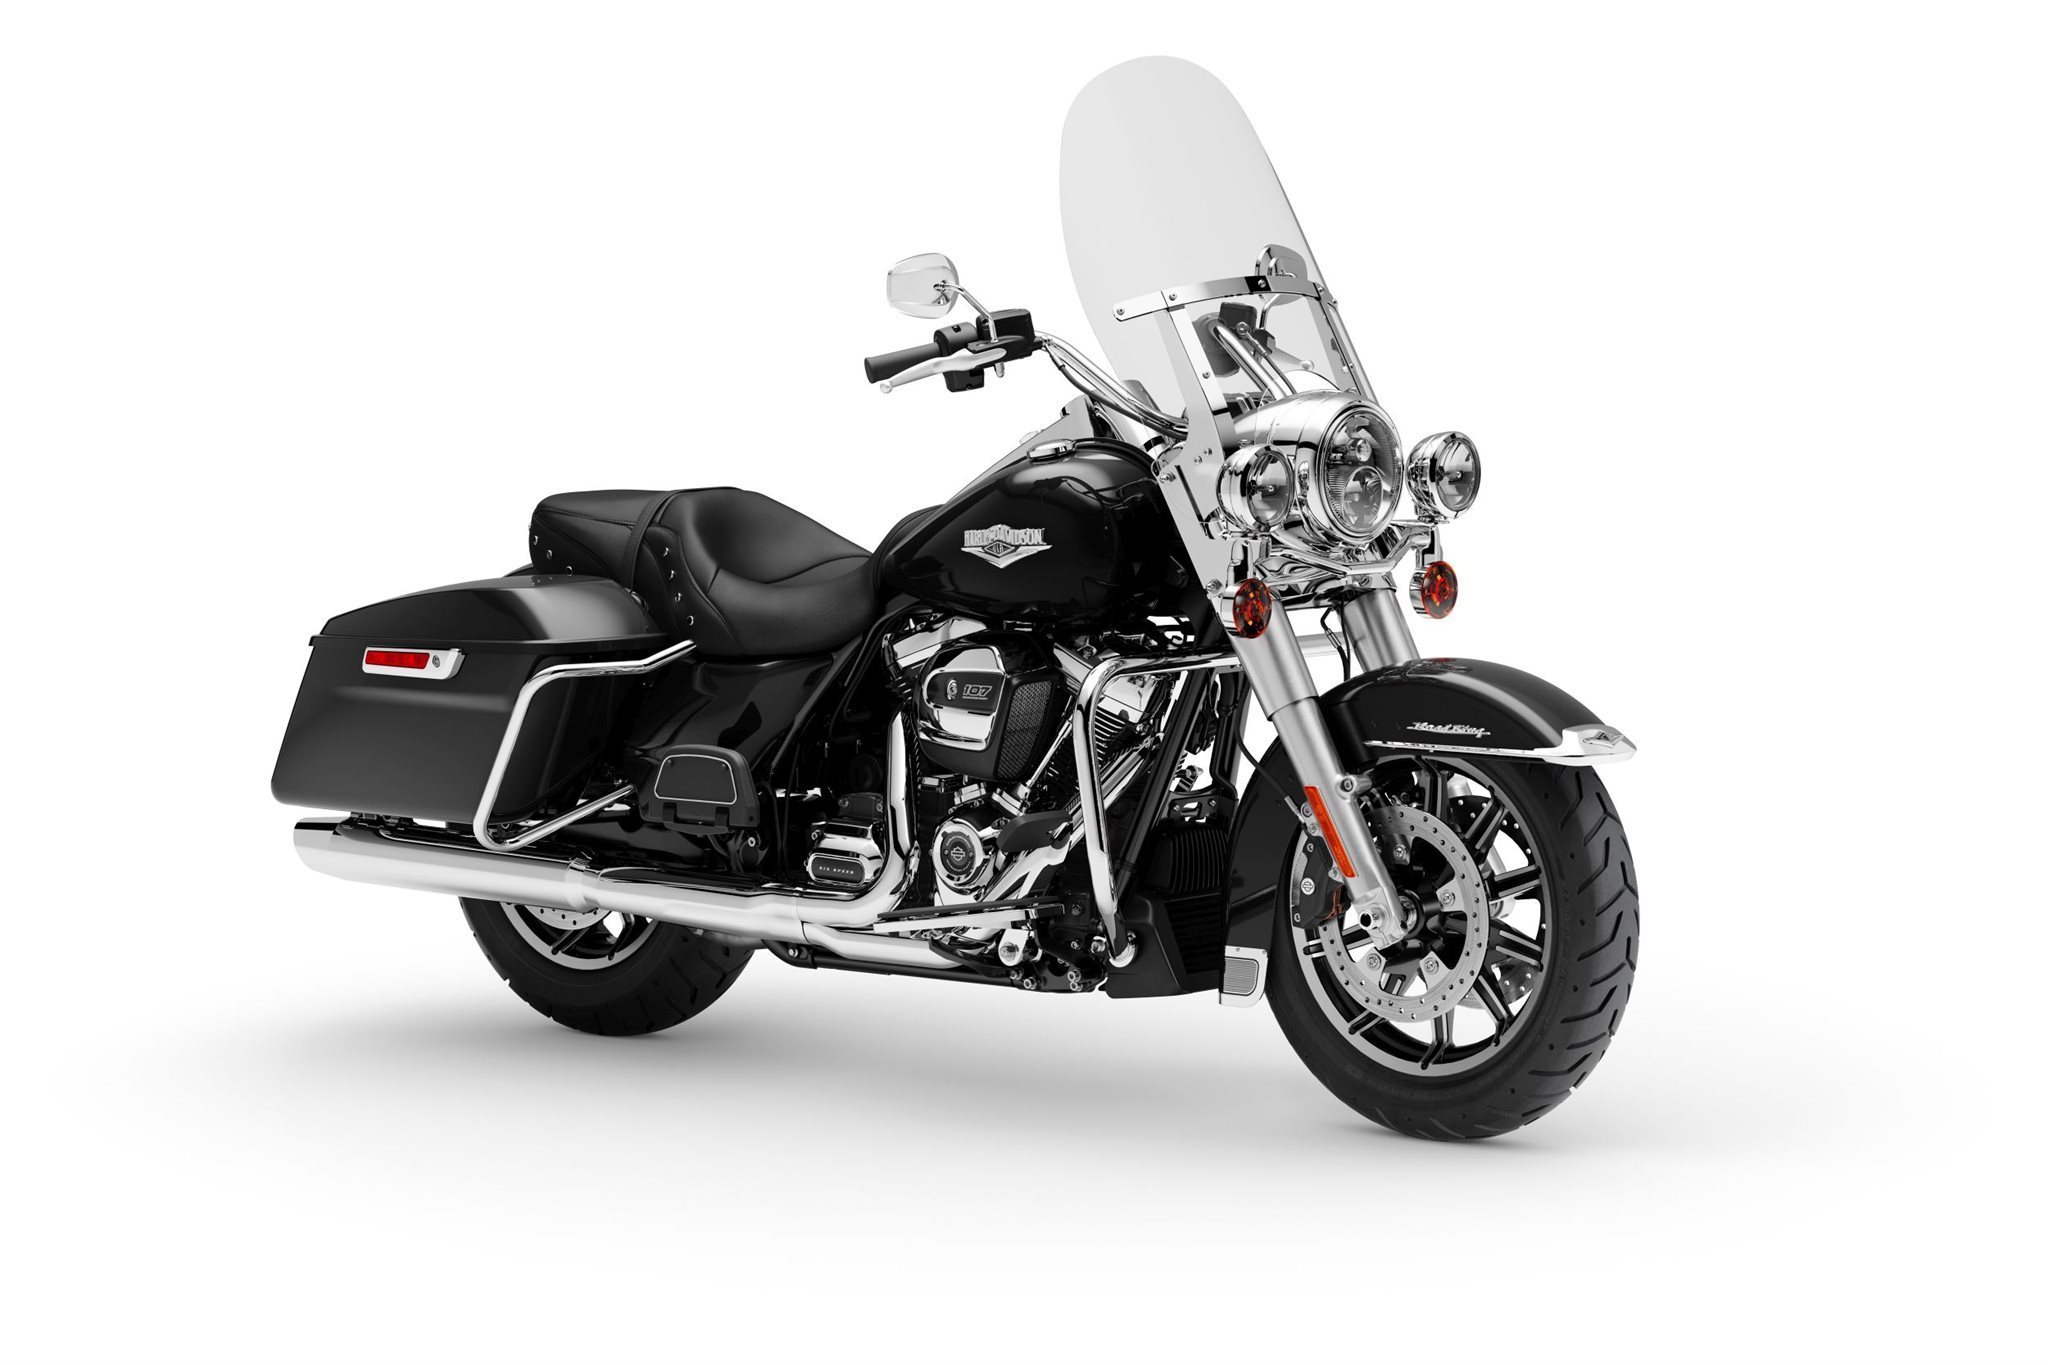 New 2021 Harley Davidson Road King Special Flhrxs Touring In Riverside 21flhrxsblk Riverside Harley Davidson